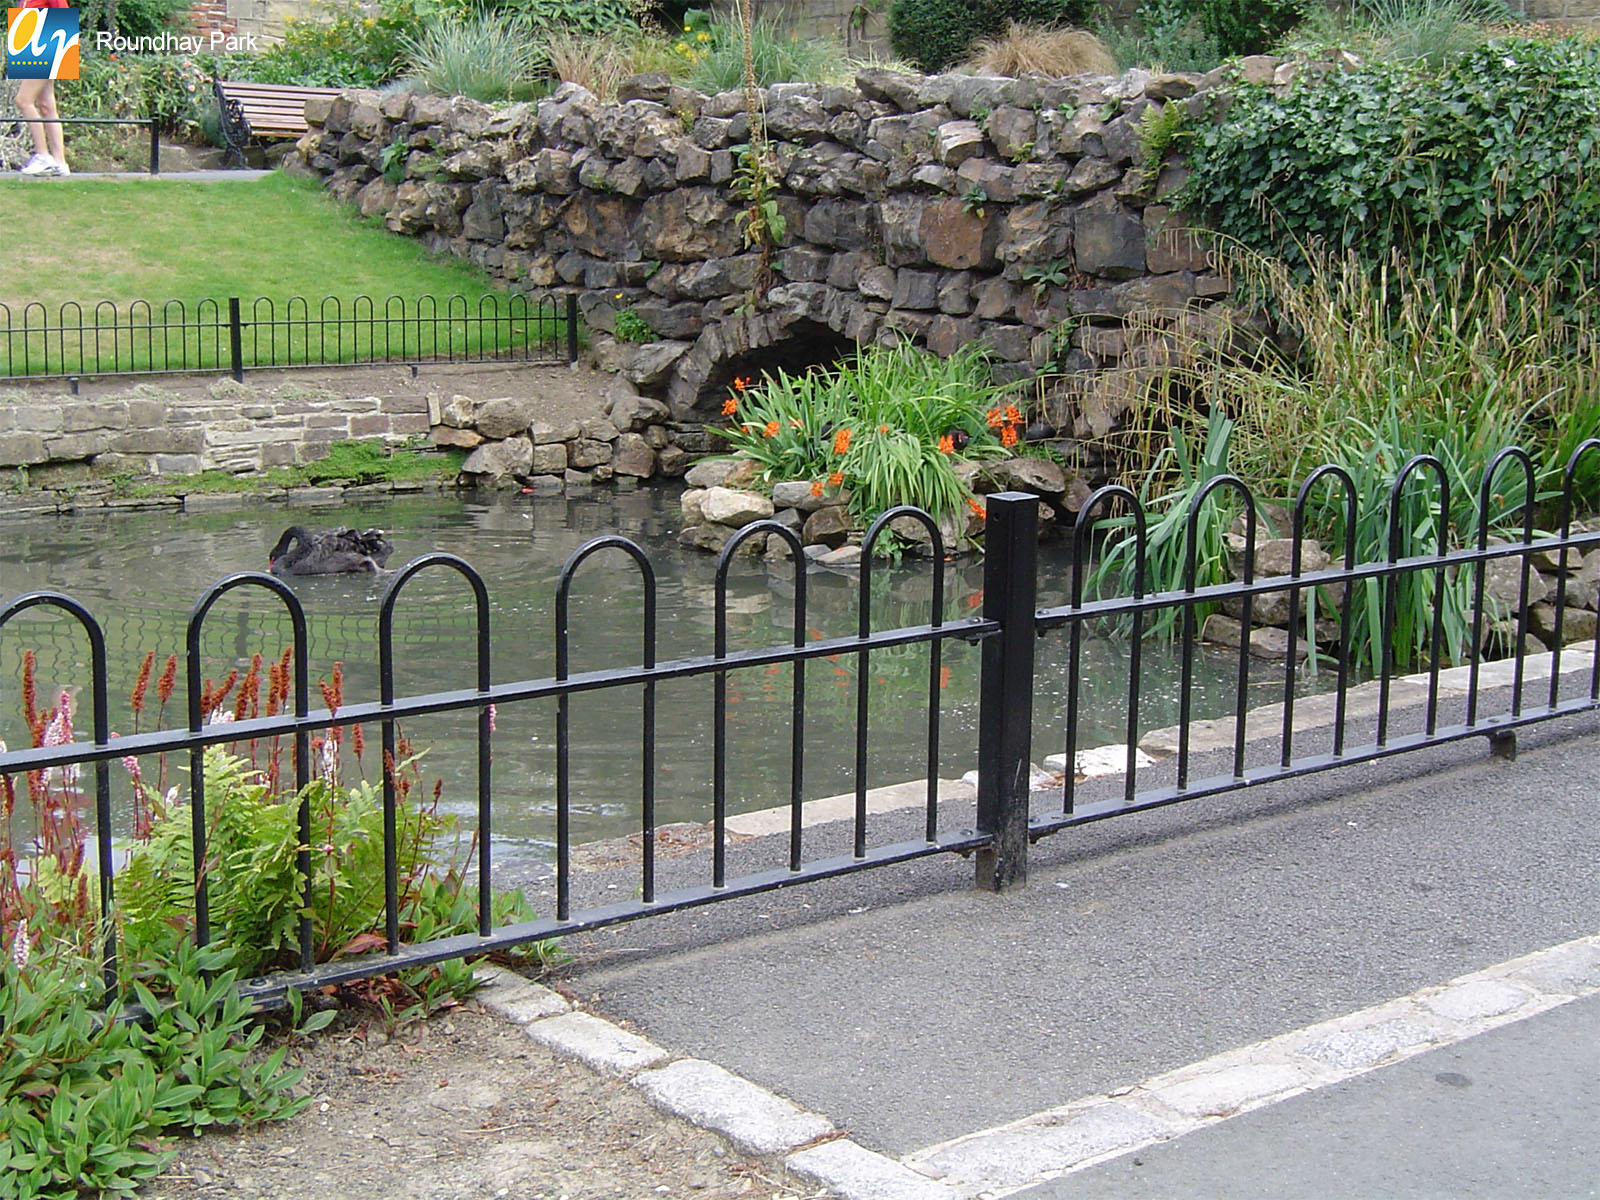 Roundhay Park standard bow top railings